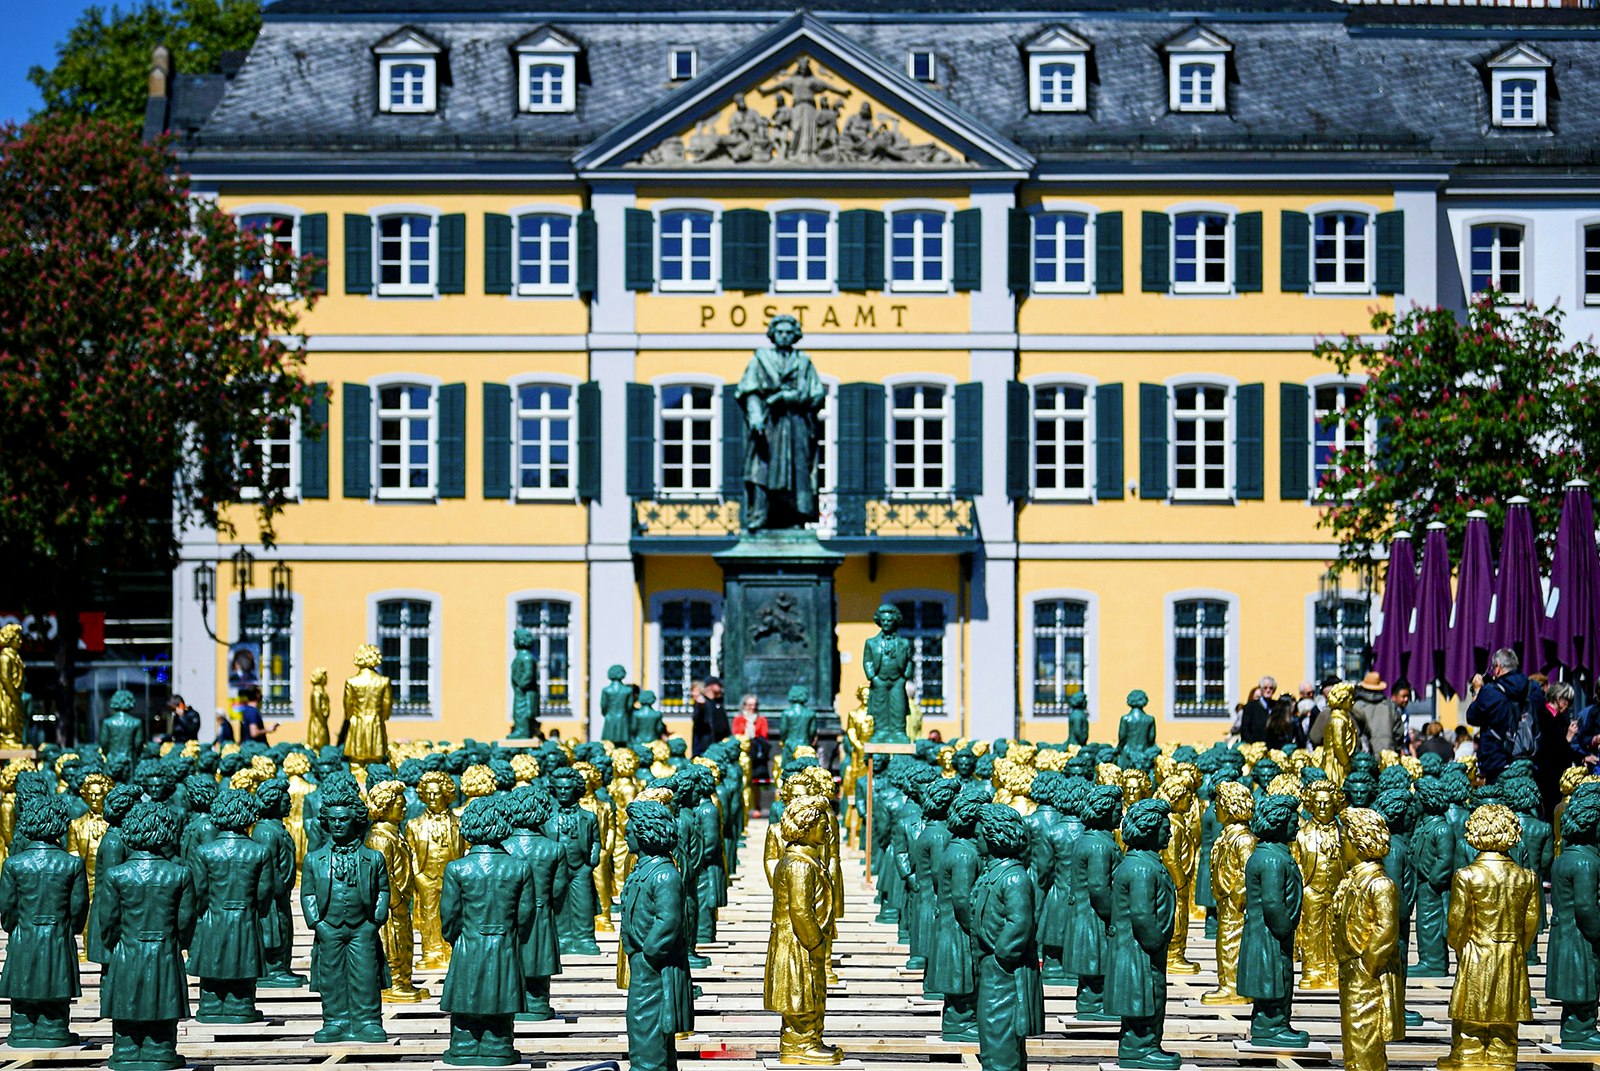 Green and gold sculptures representing Beethoven are lined up in Bonn's Münsterplatz.